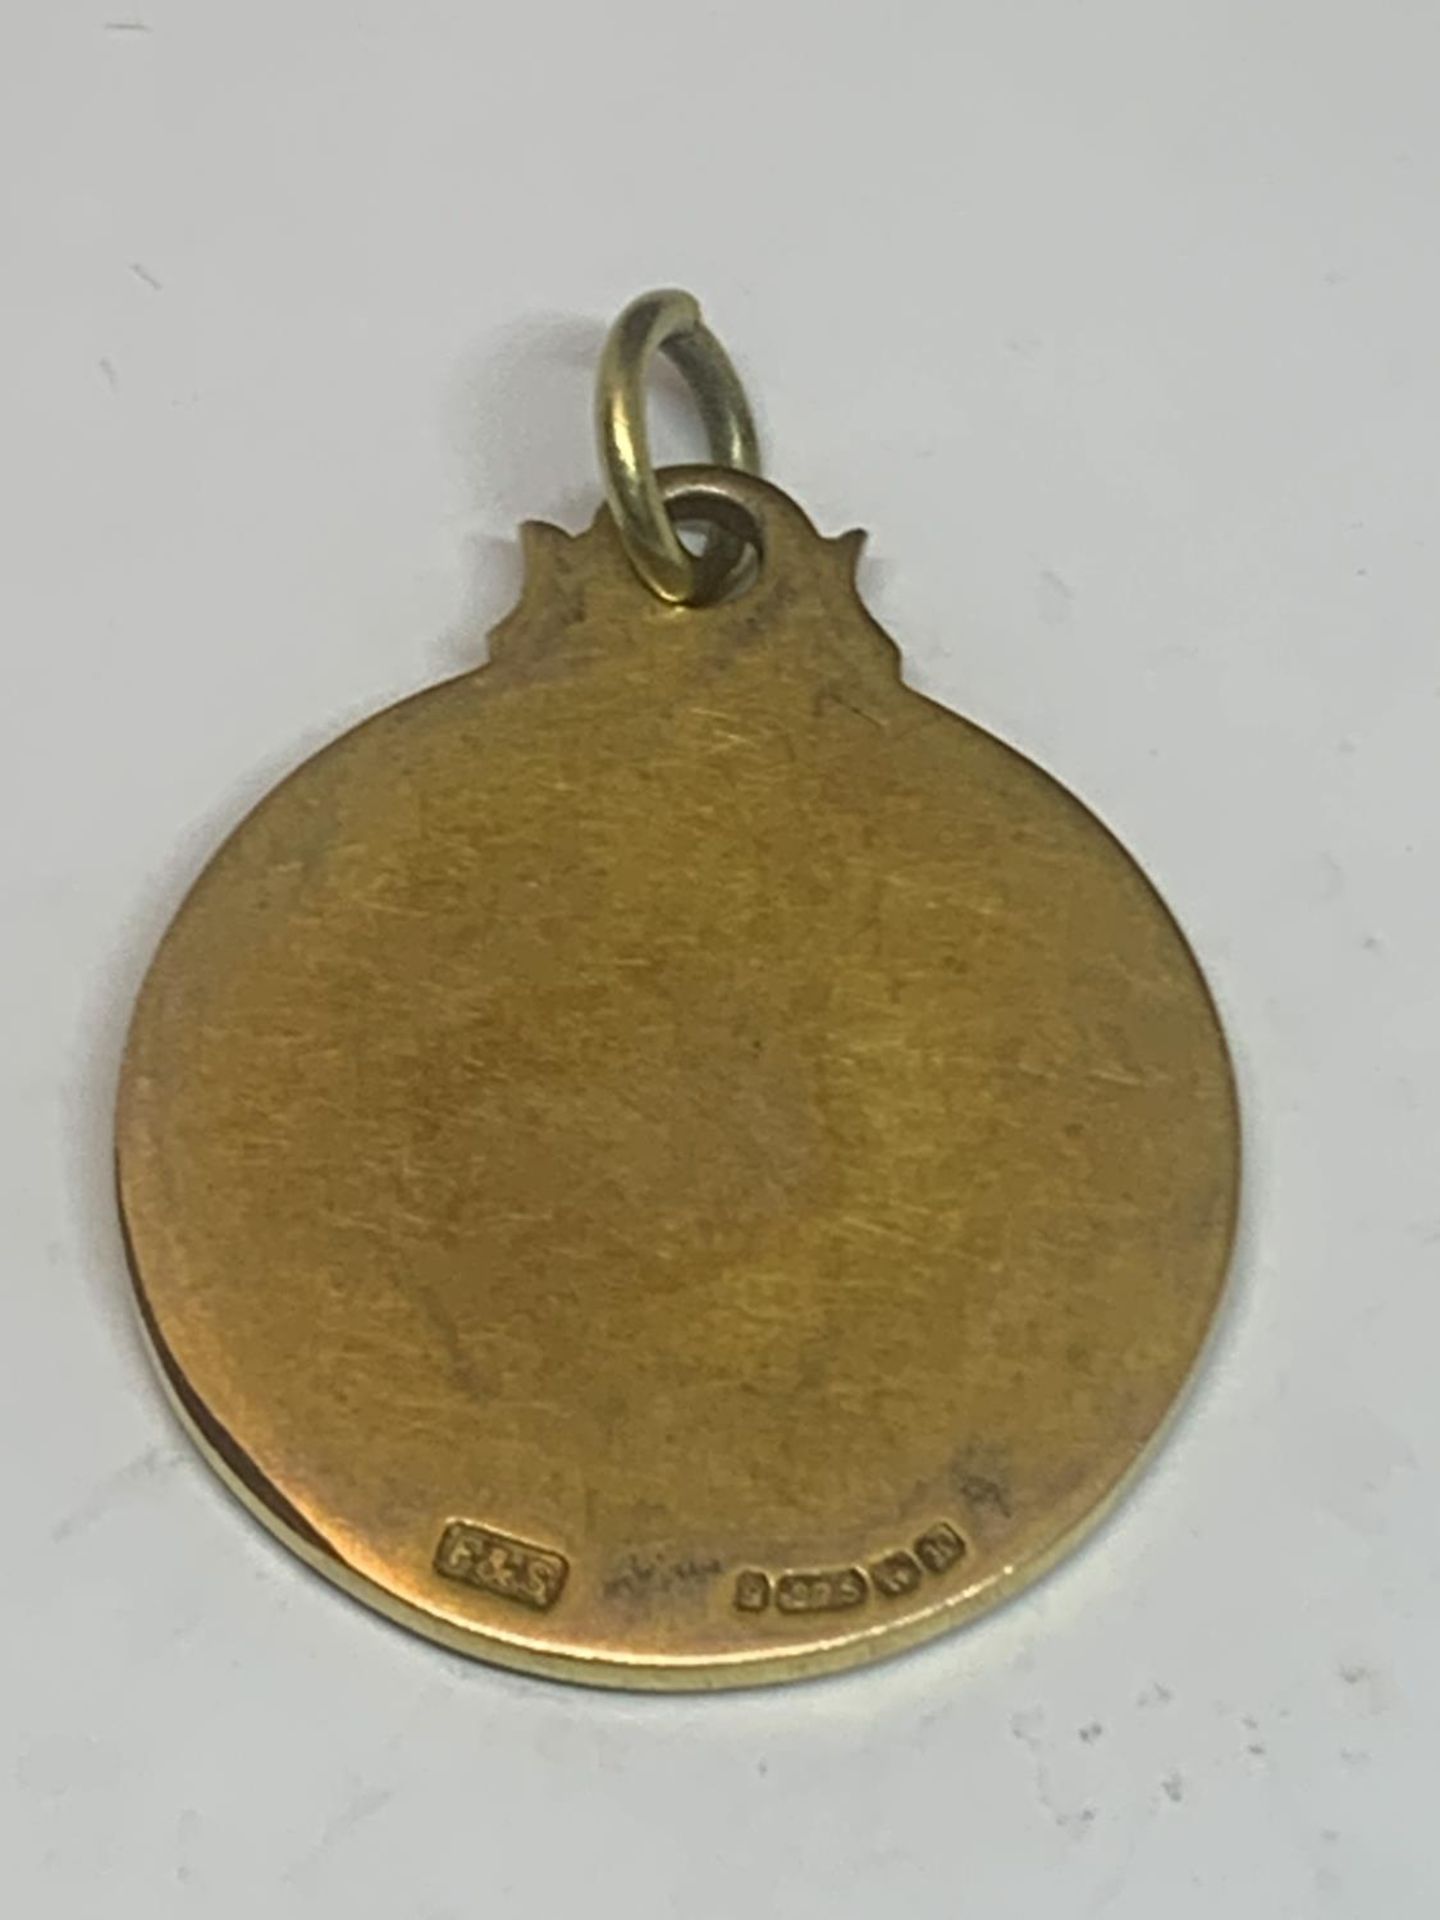 A HALLMARKED 9 CARAT GOLD LANCASHIRE COUNTY RUGBY LEAGUE SENIOR CUP MEDAL GROSS WEIGHT 17.38 GRAMS - Image 2 of 4